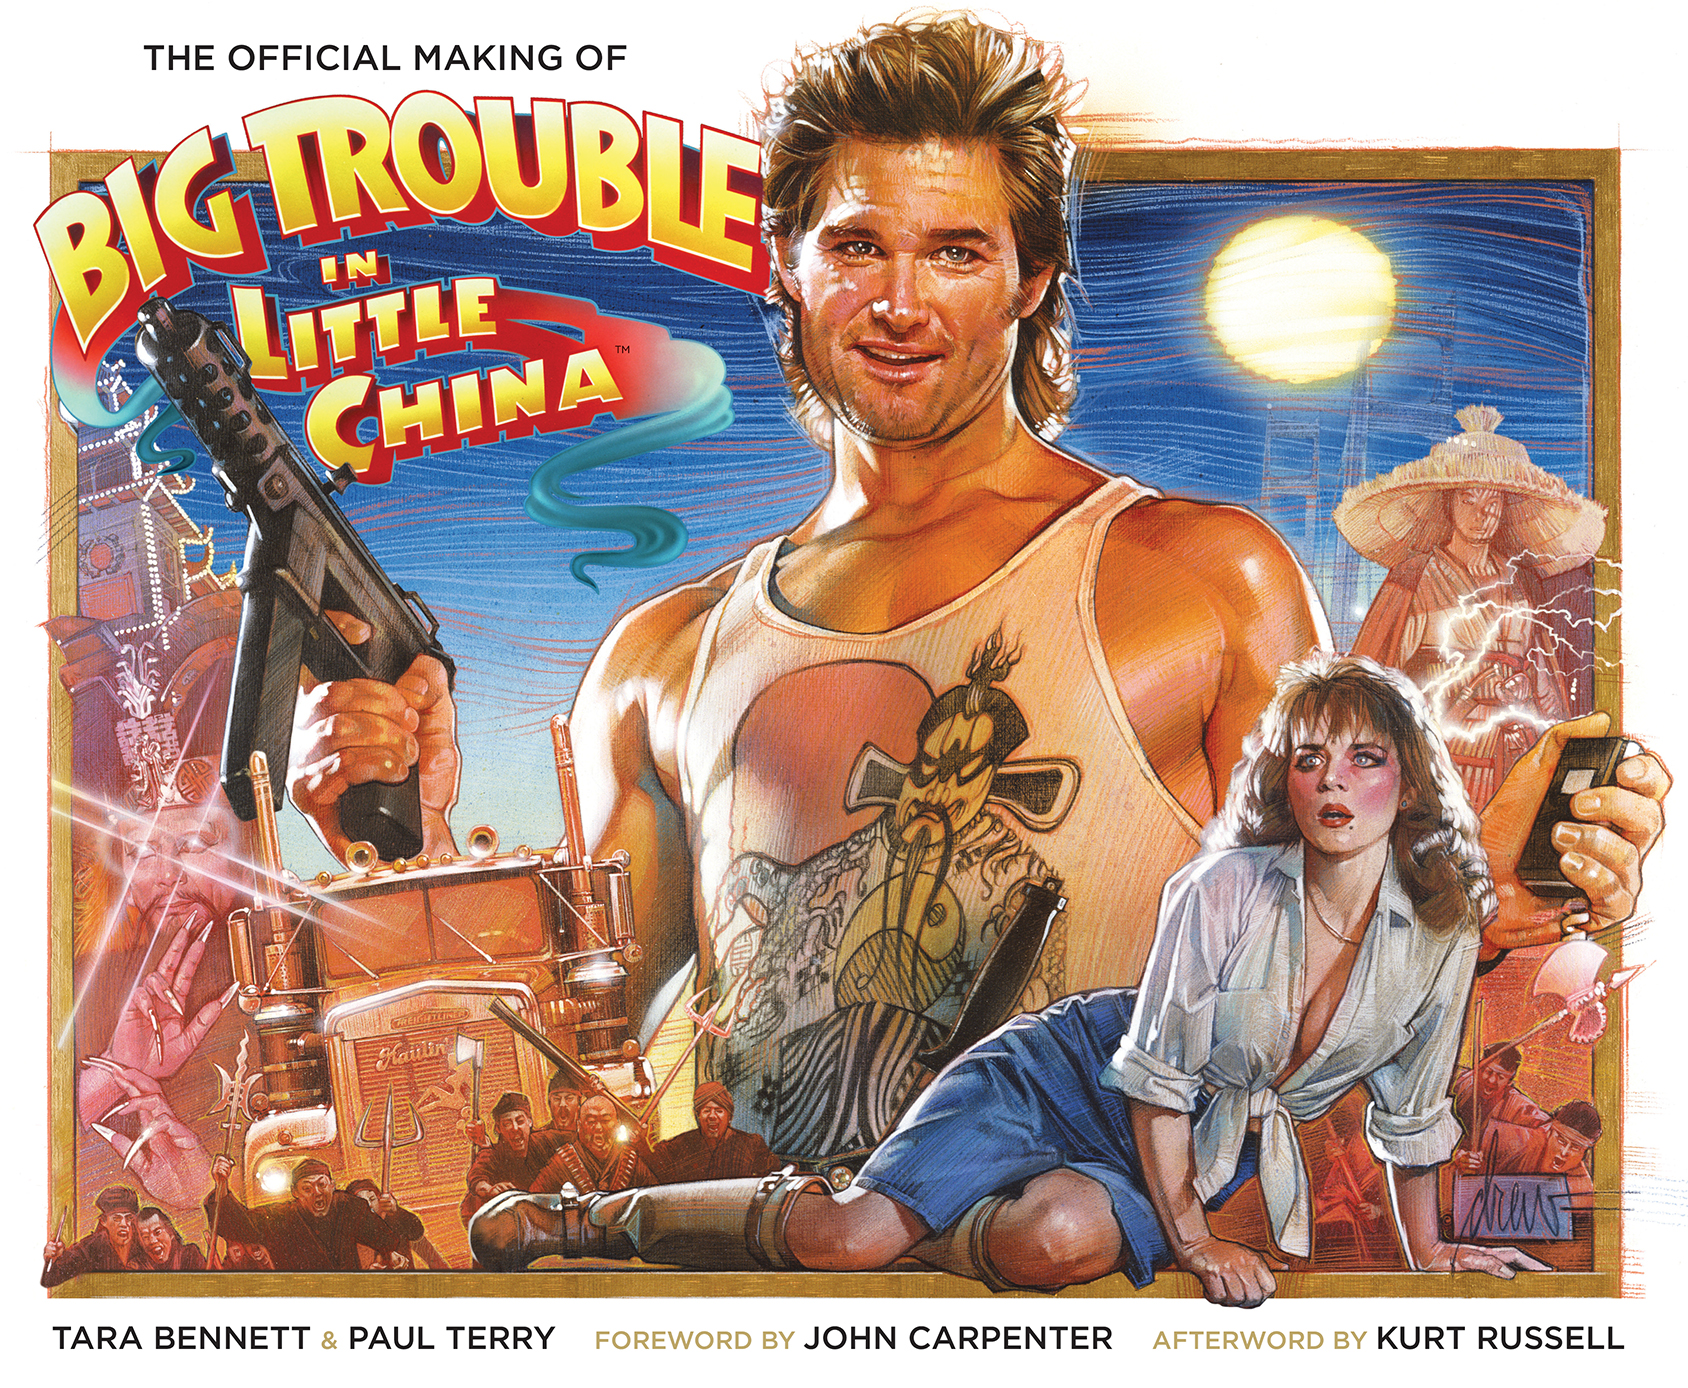 The Art That Helped Make Big Trouble In Little China A Cult Classic Masterpiece